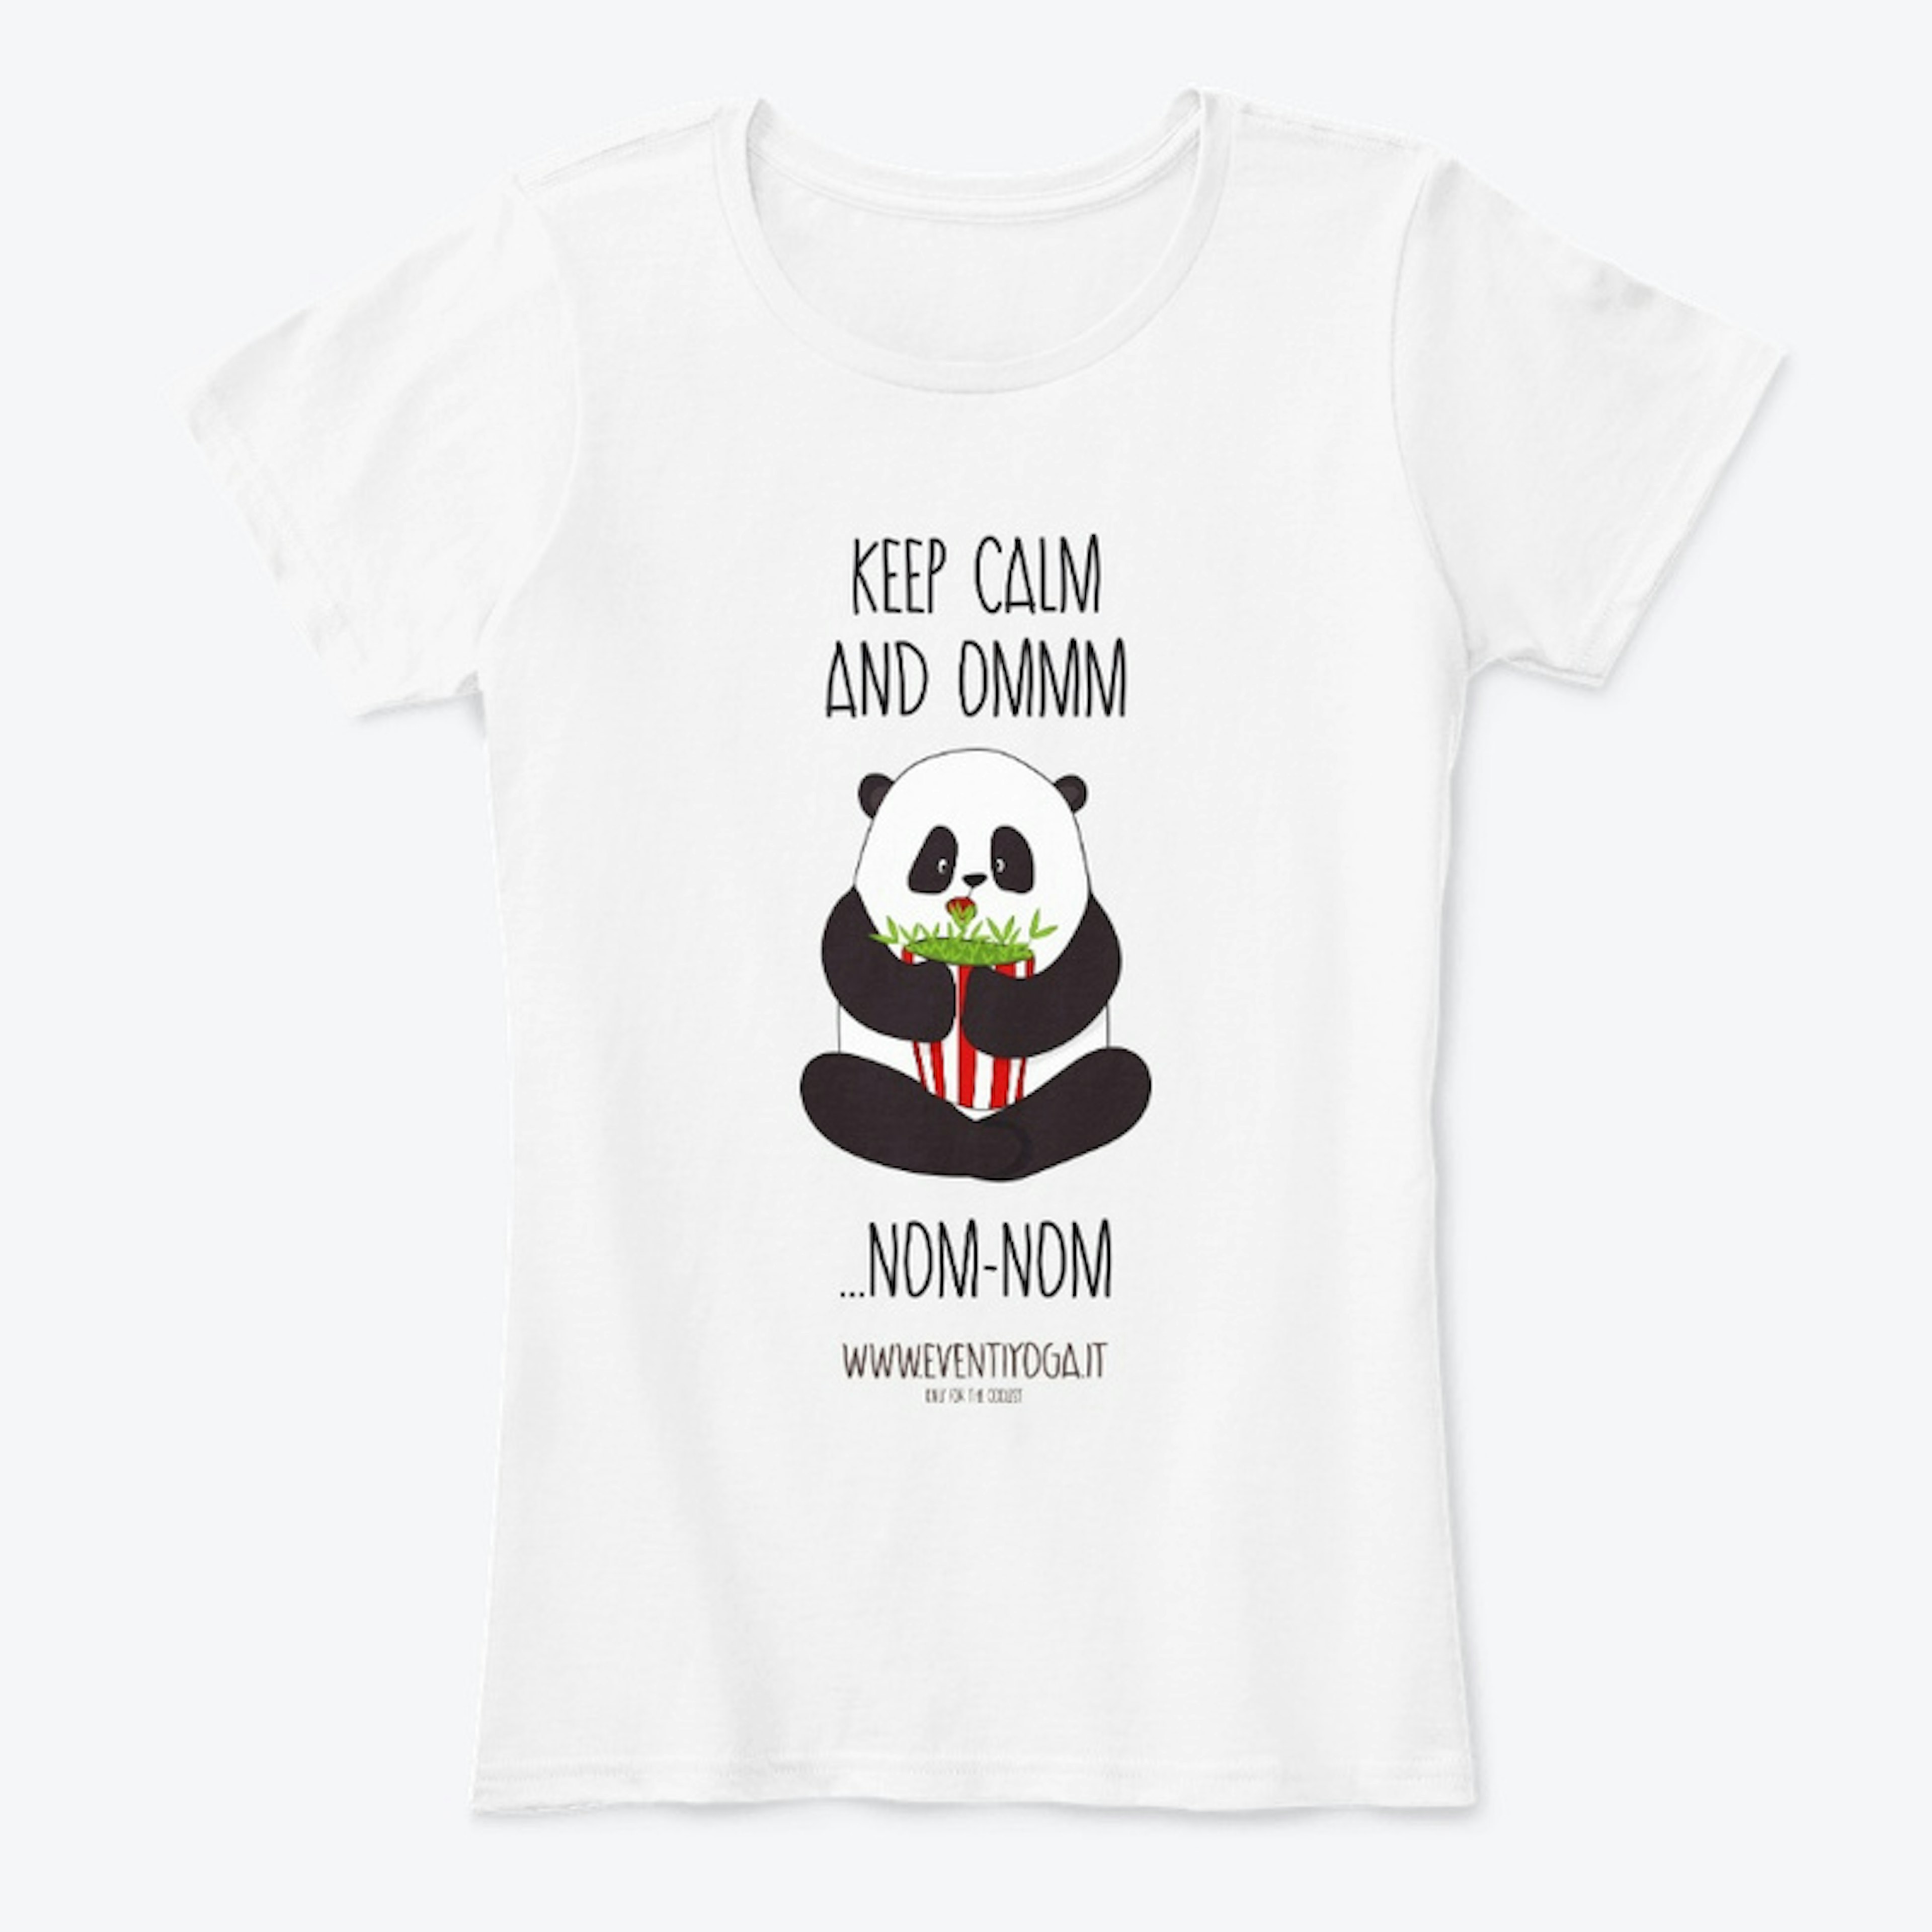 Funny T-shirt: "KEEP CALM AND OM"